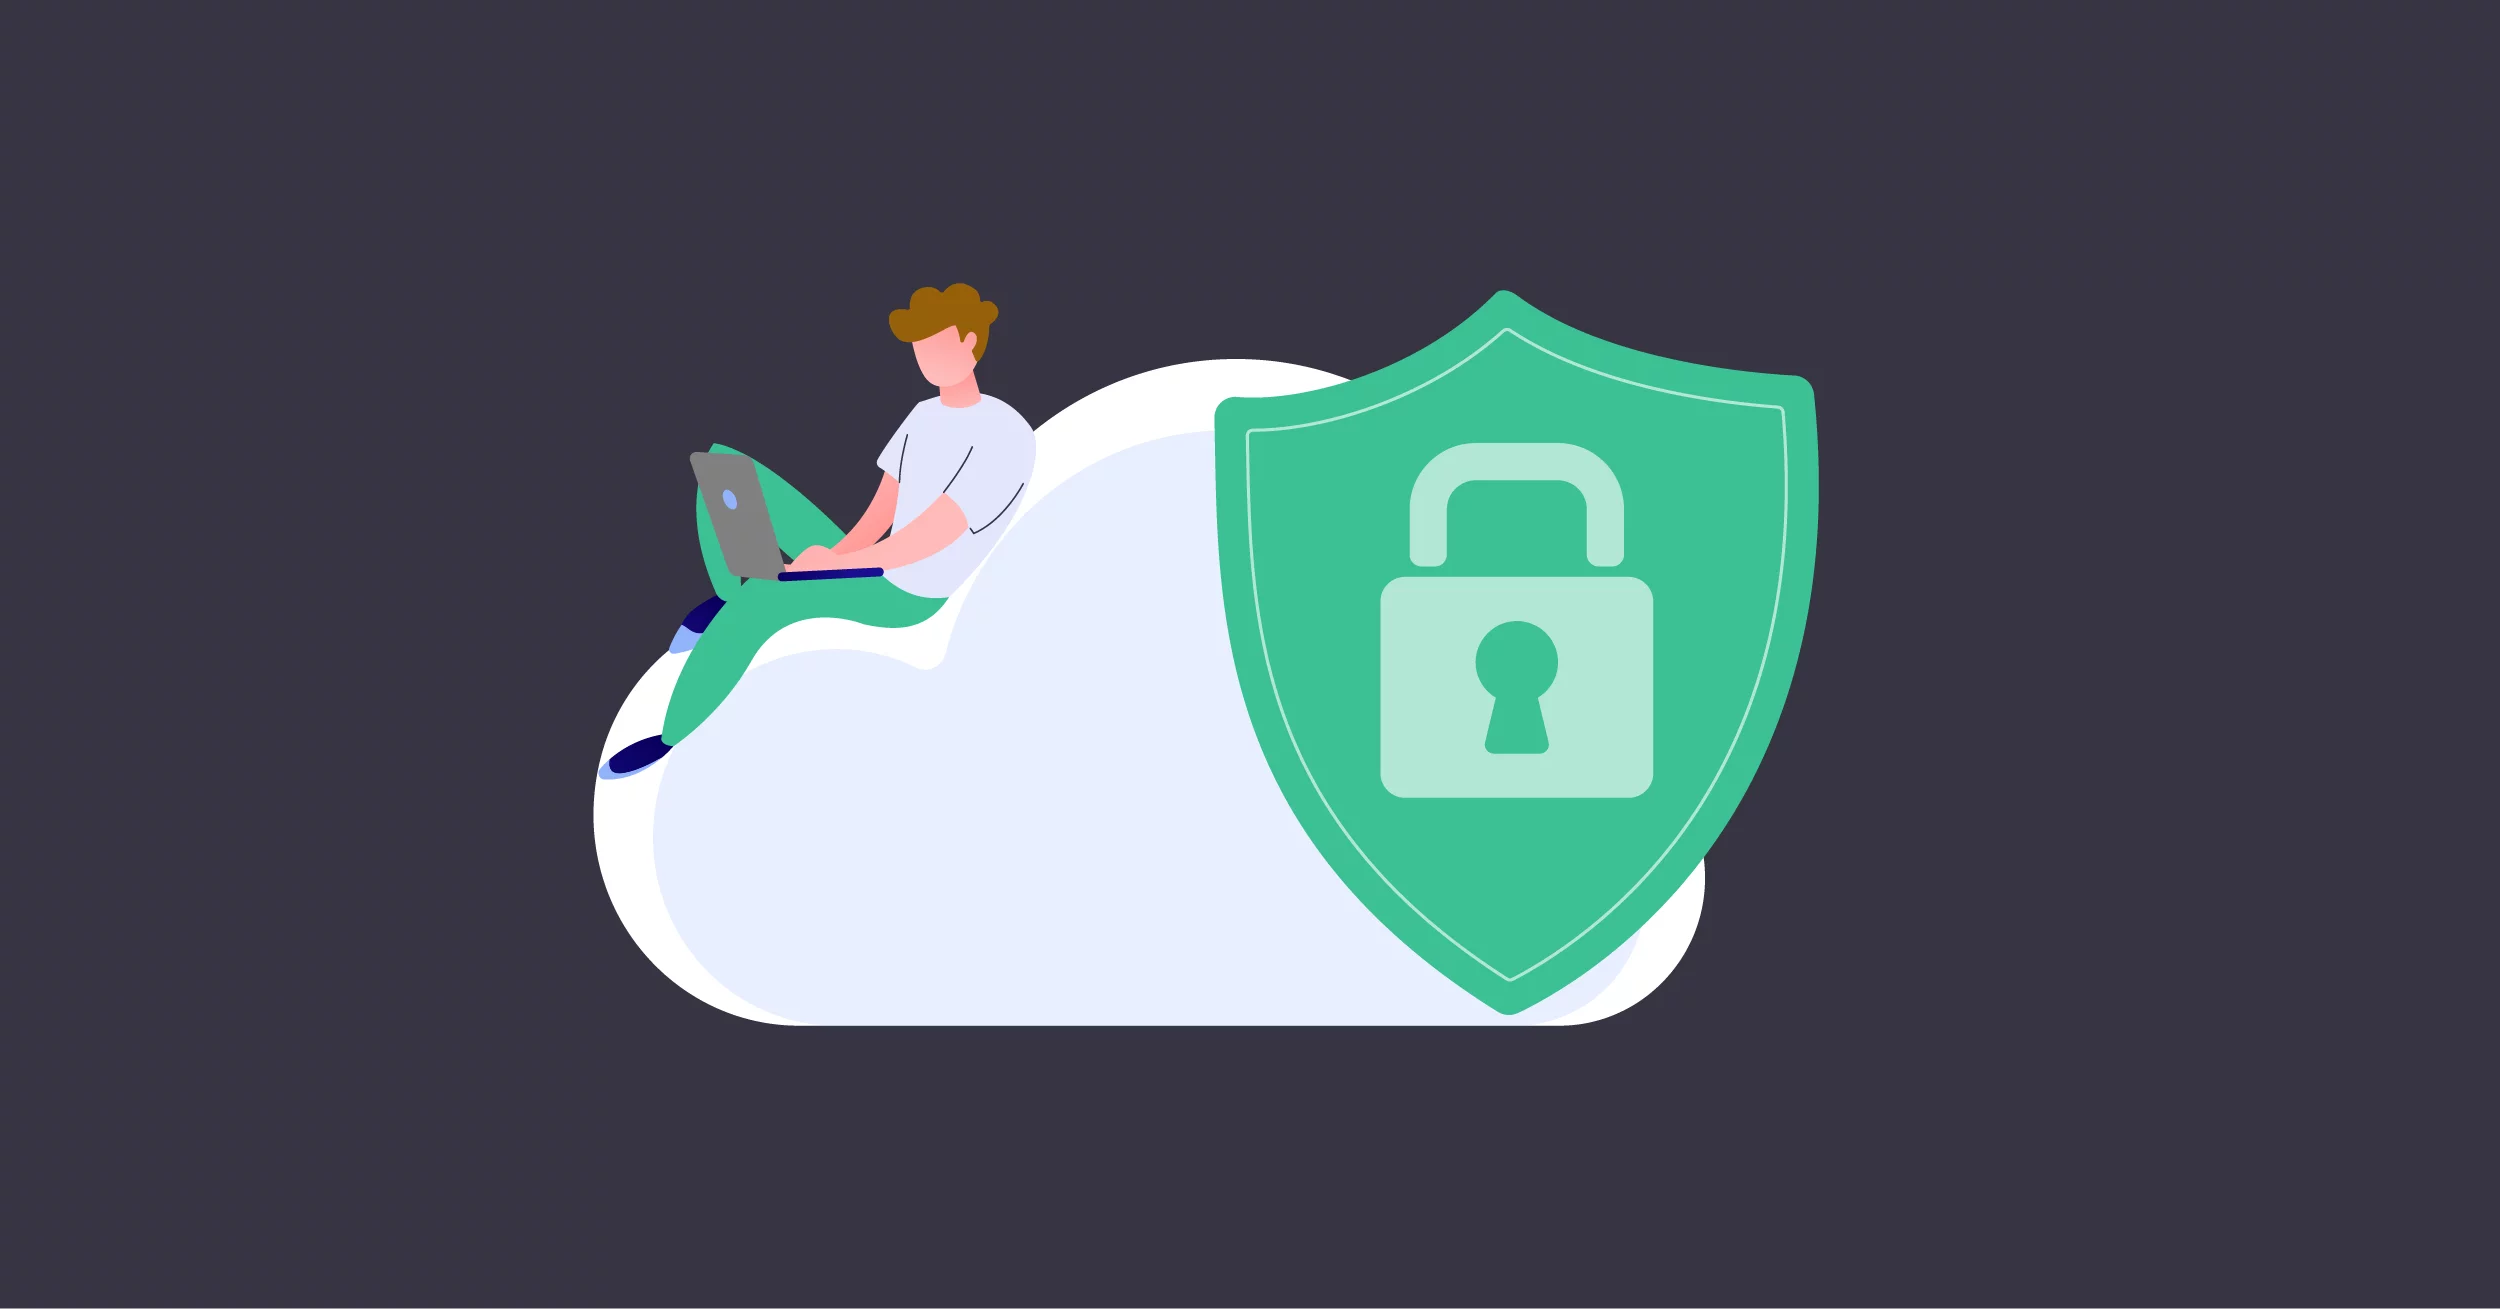 Centralized key management shown by man sitting on a cloud working on laptop with security icon on cloud